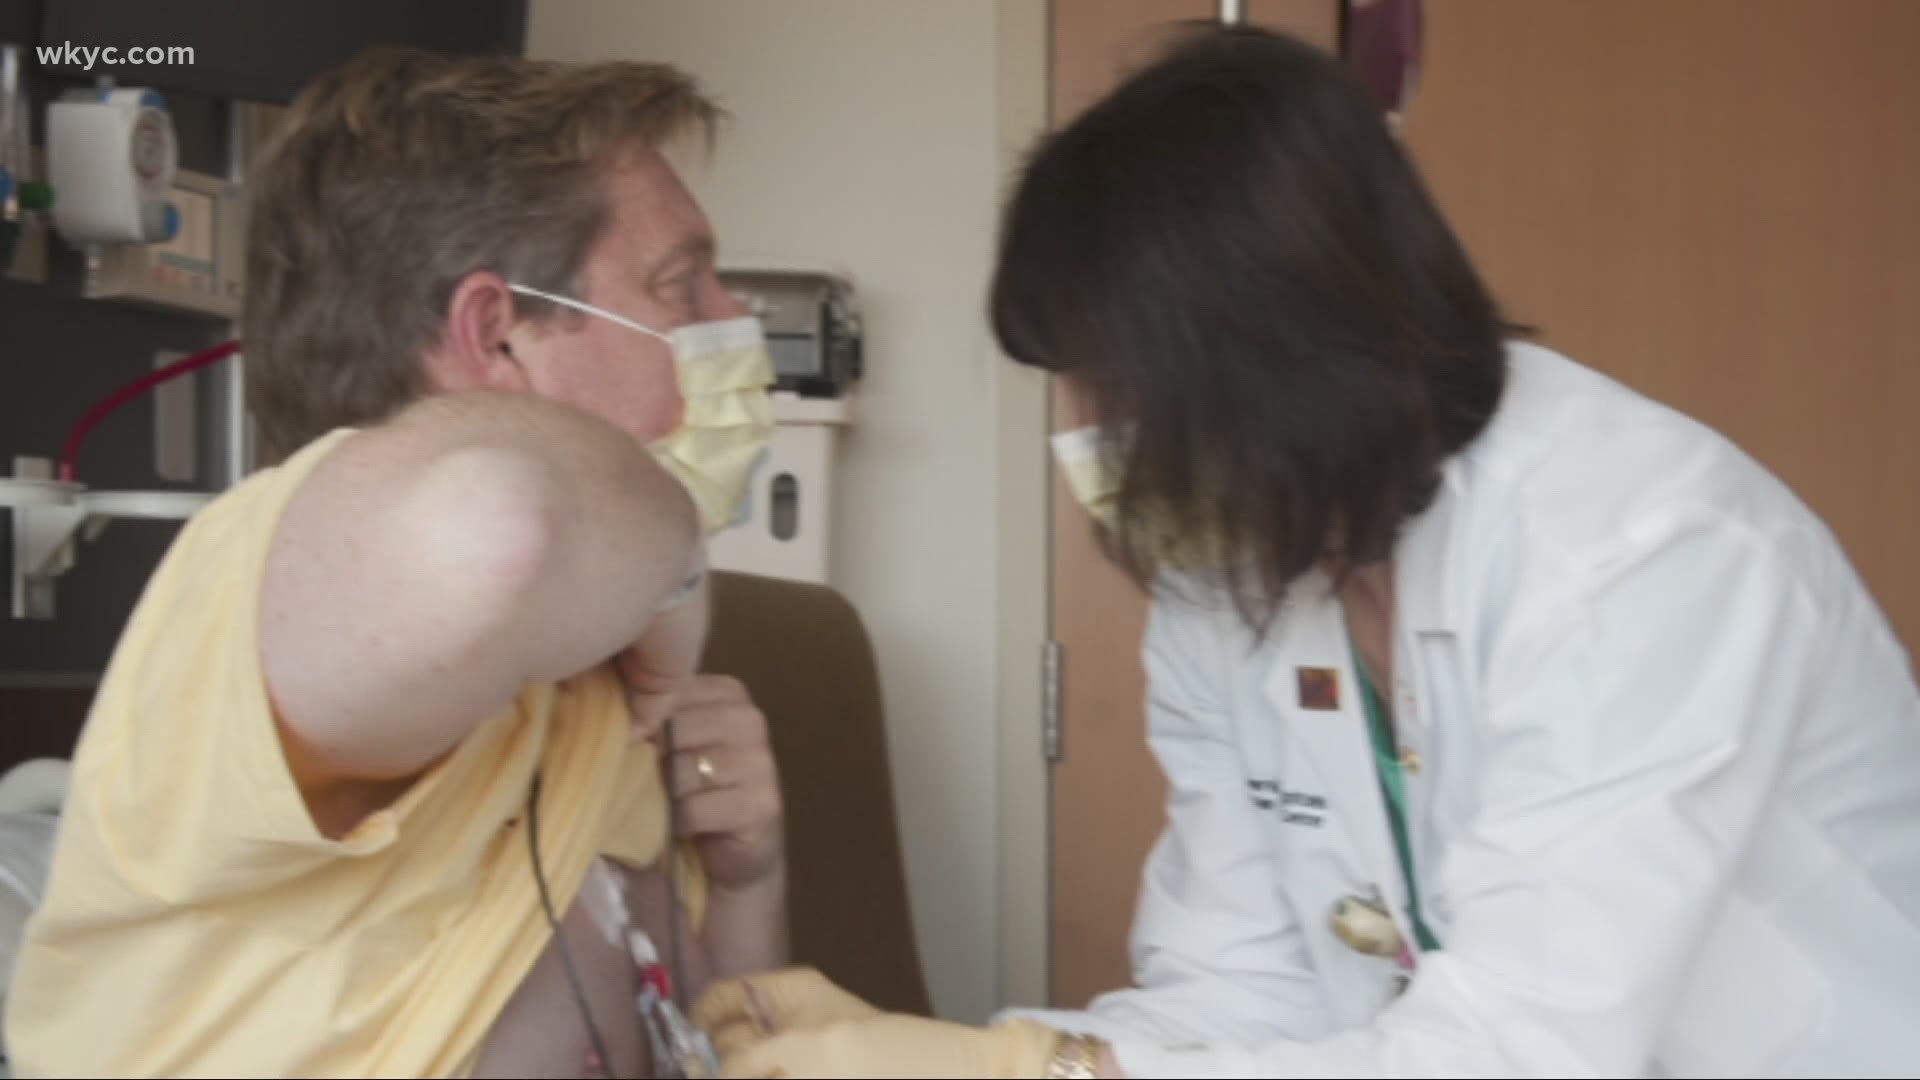 WKYC’s Jim Donovan was one of the first patients treated at the hospital. He and Monica Robins look back at his experience.